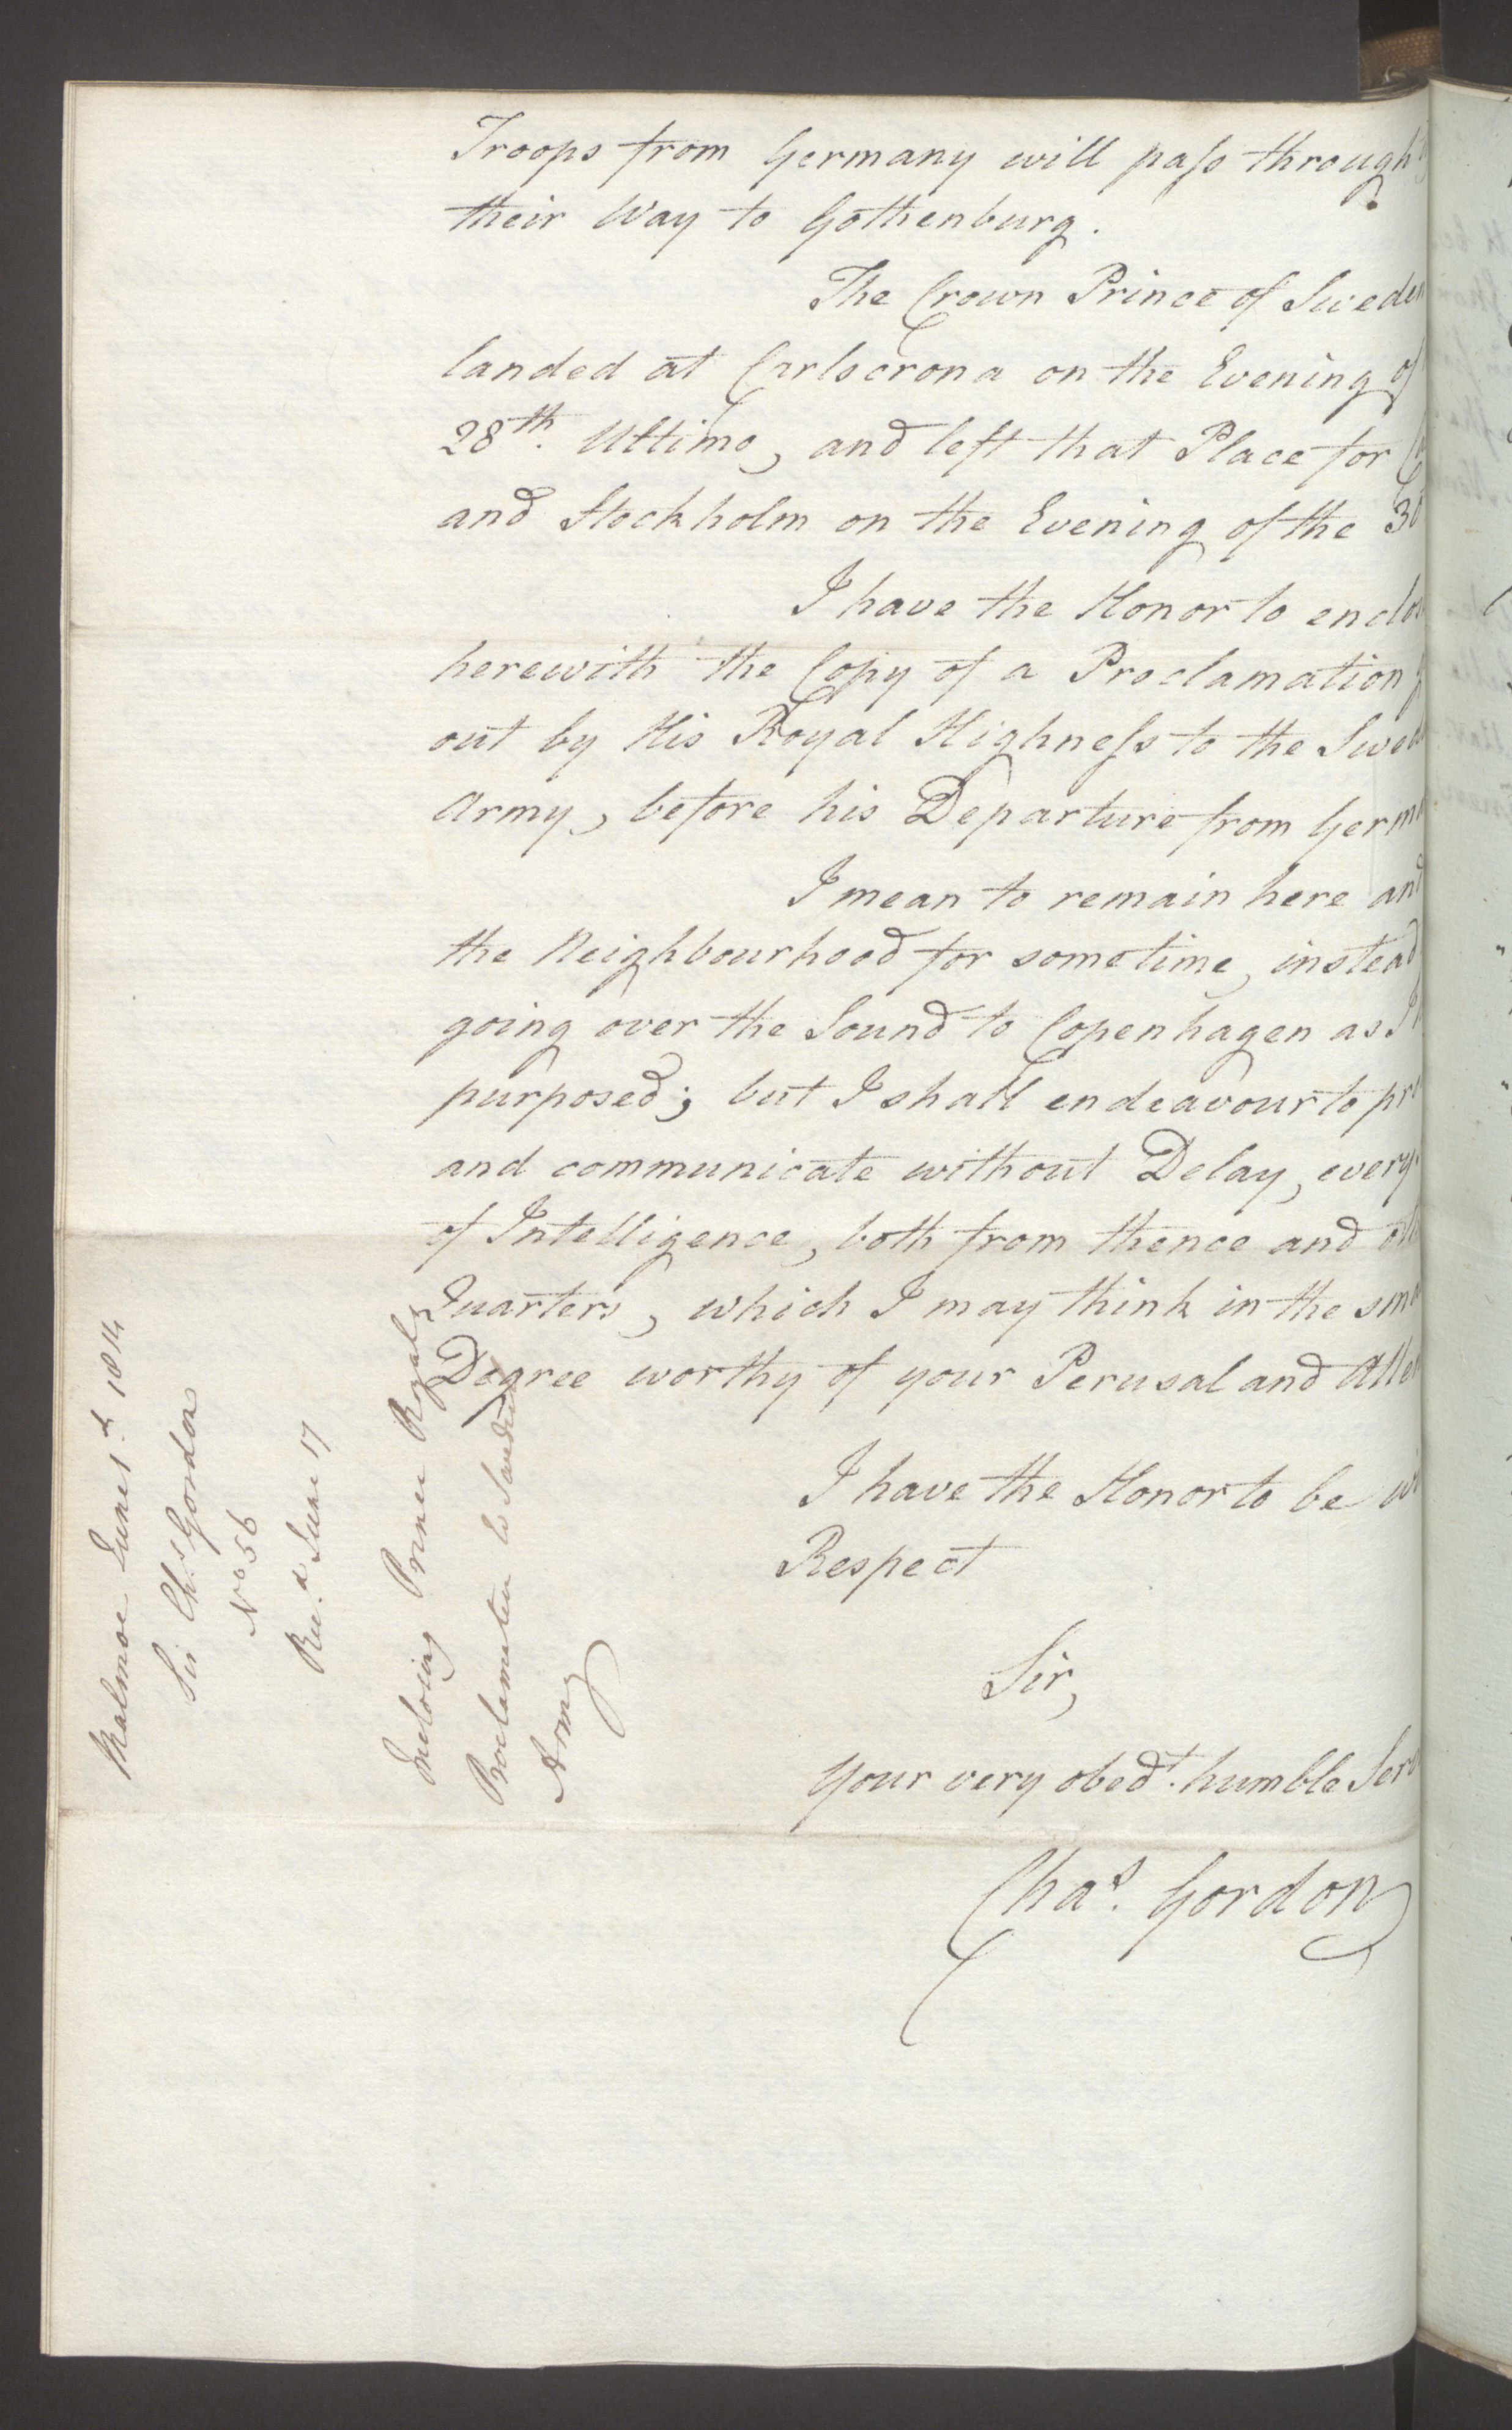 Foreign Office*, UKA/-/FO 38/16: Sir C. Gordon. Reports from Malmö, Jonkoping, and Helsingborg, 1814, p. 60